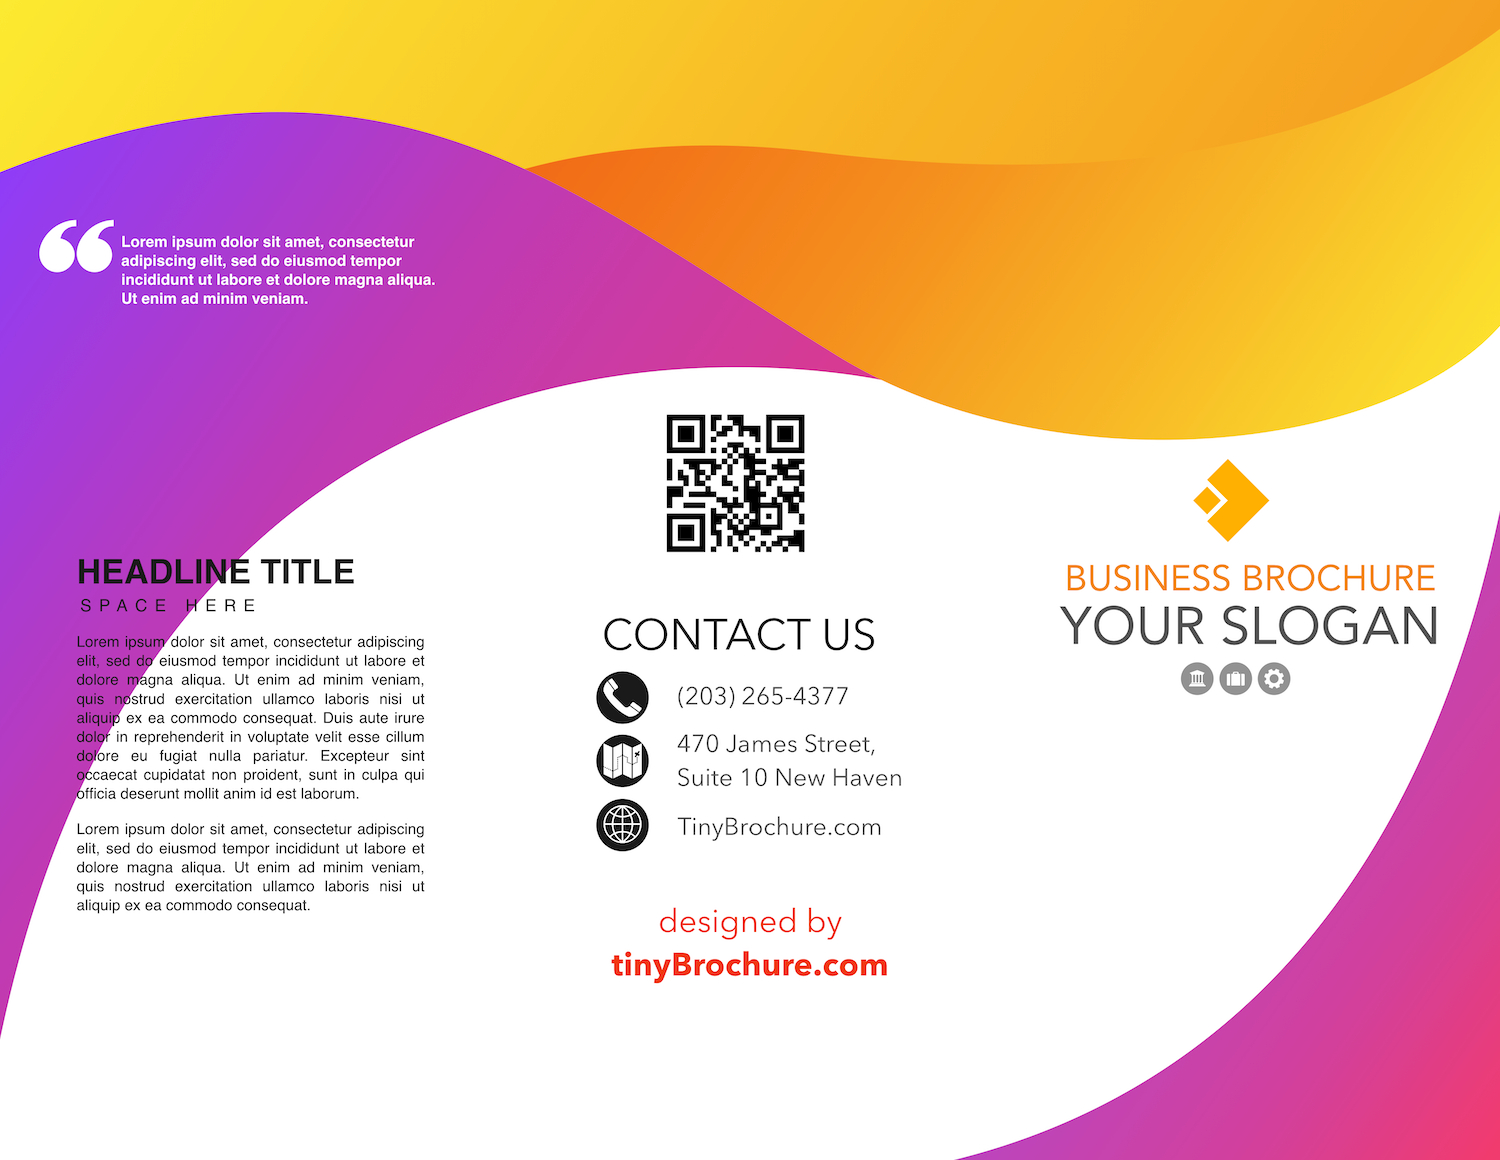 How To Make A Tri Fold Brochure In Google Docs With Regard To Google Docs Tri Fold Brochure Template